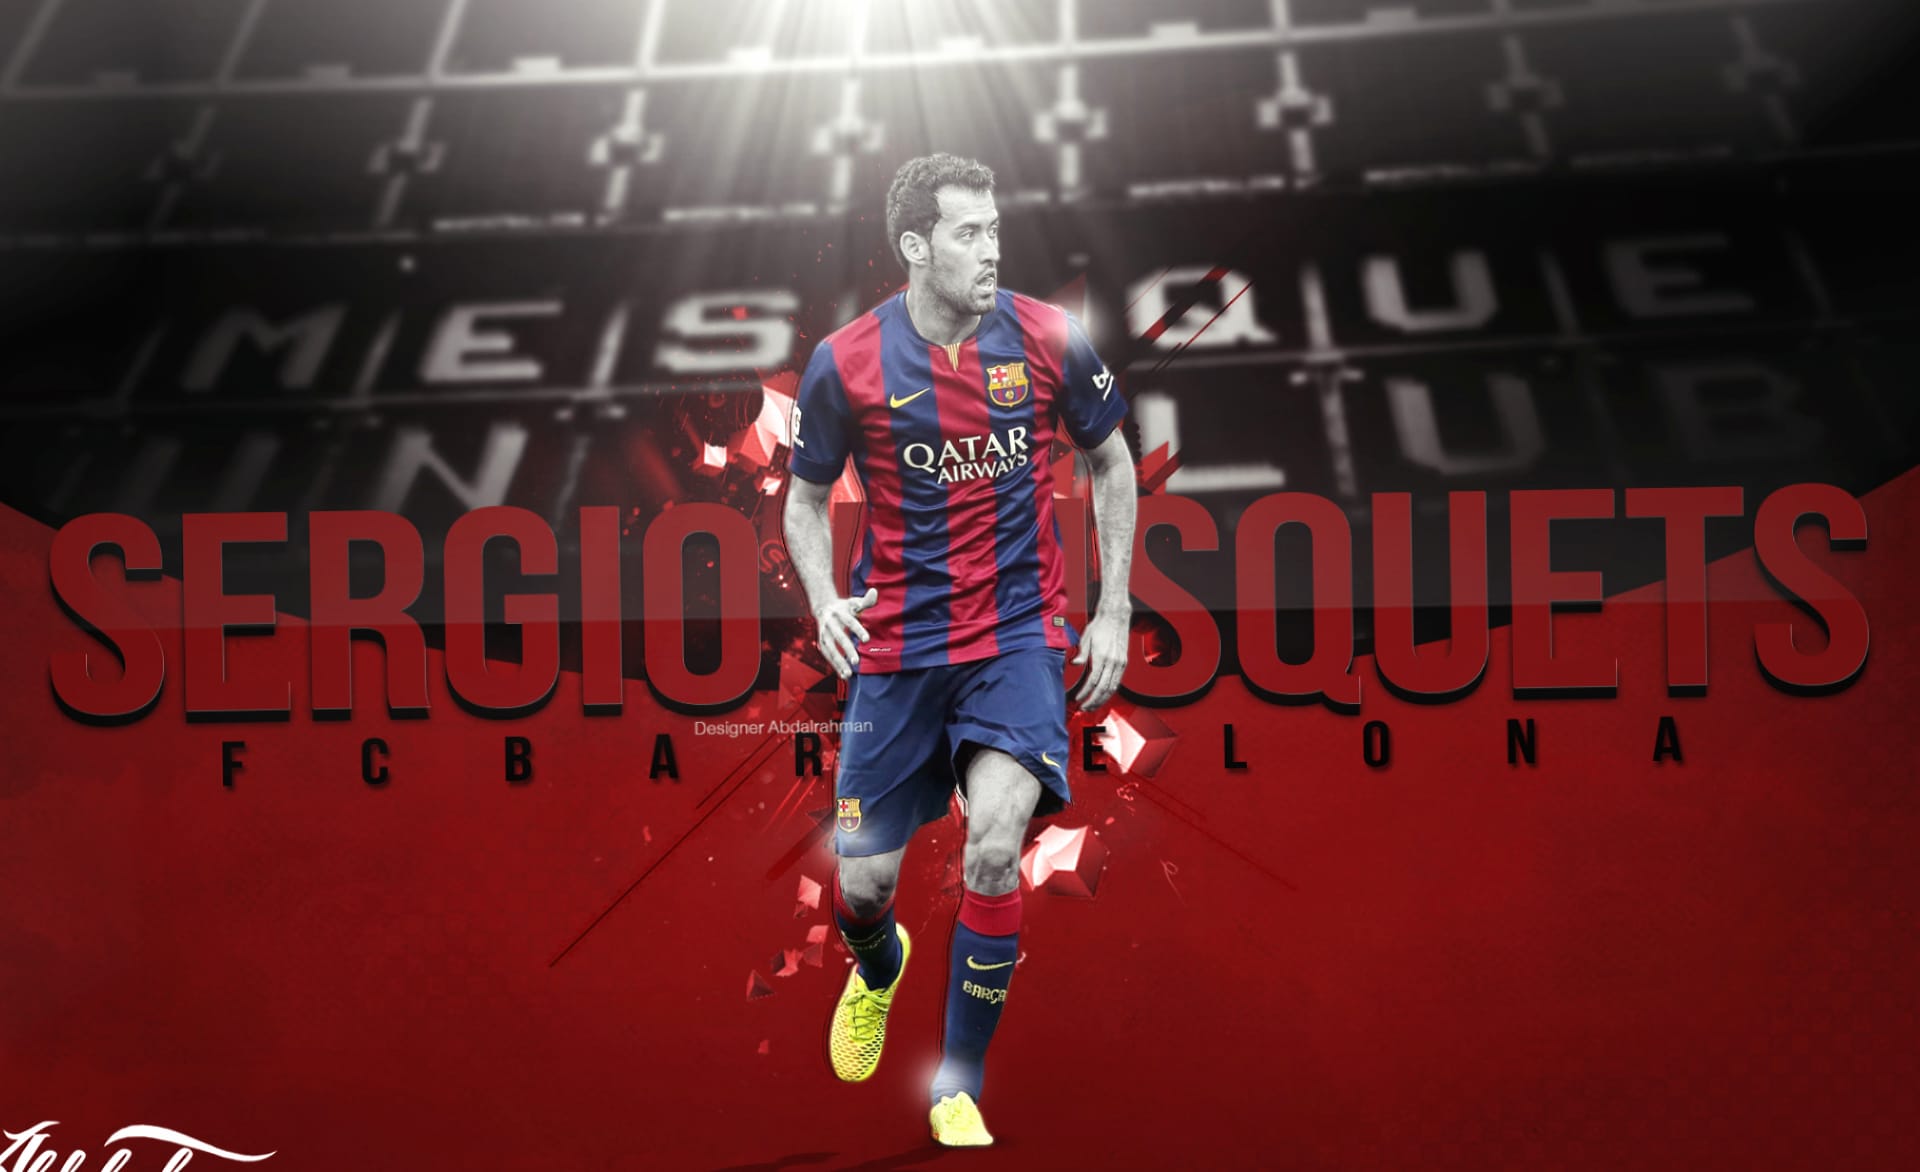 Sergio Busquets wallpapers HD quality